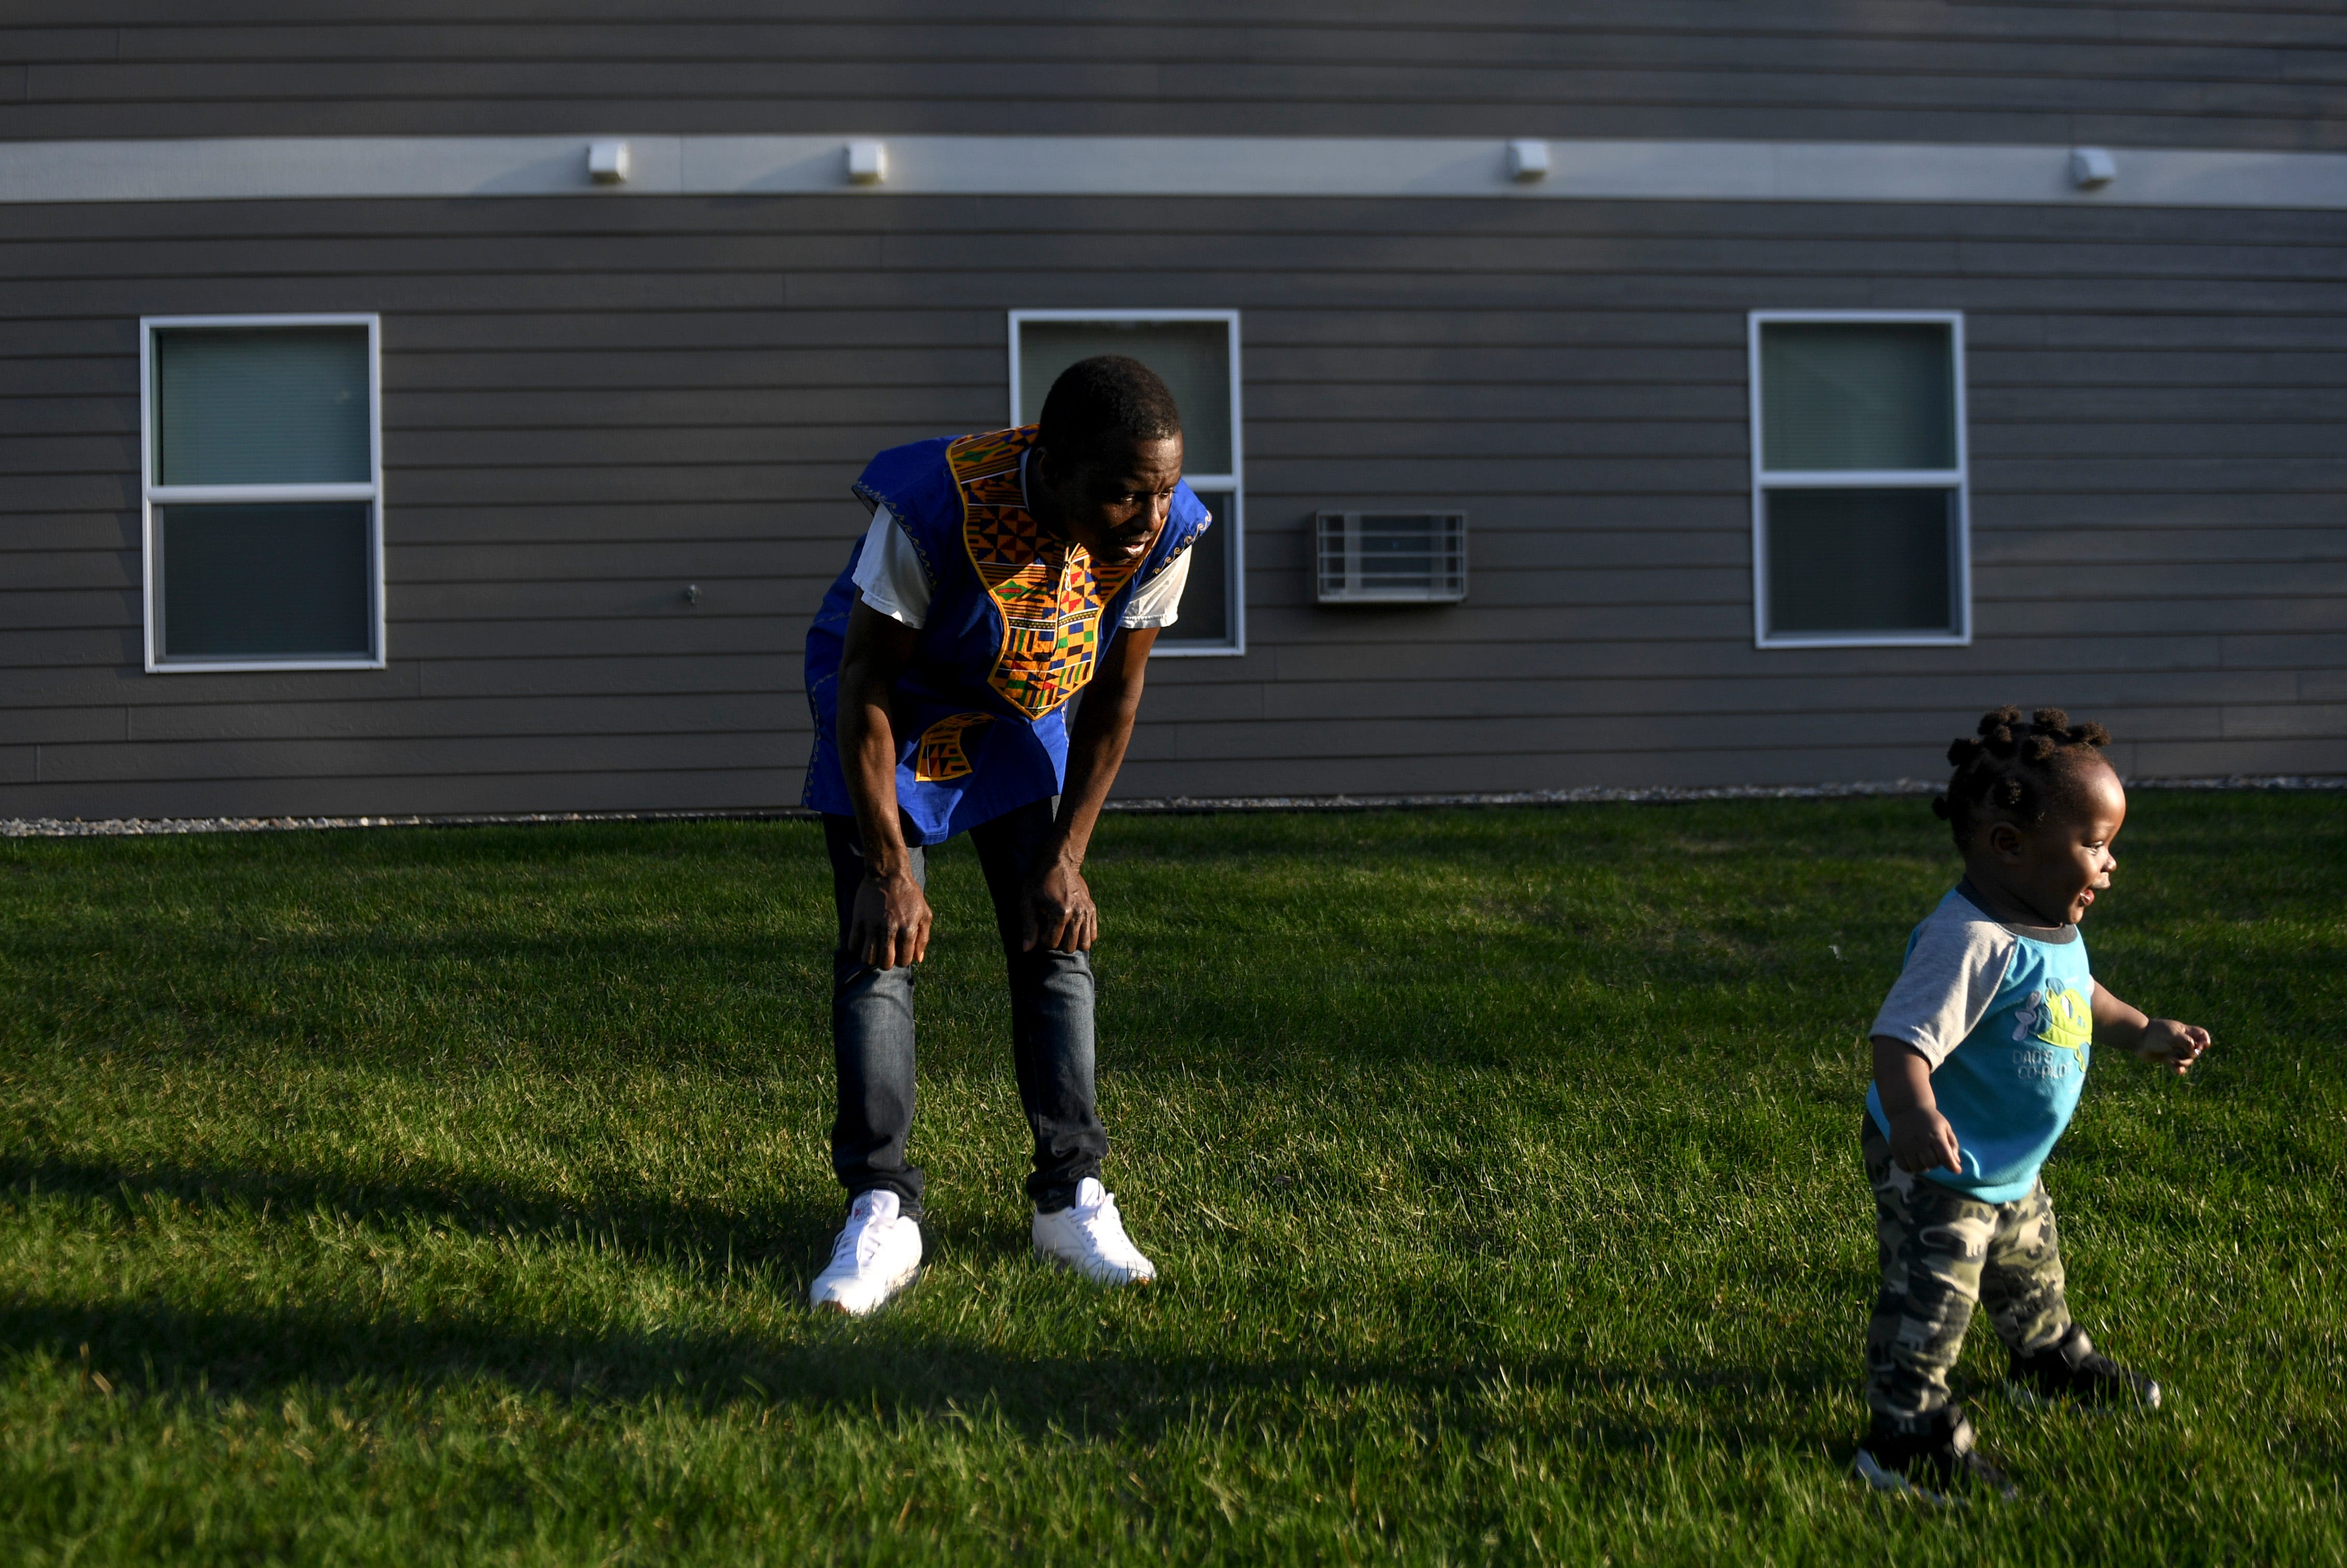 John Deranamie spends time with his youngest son, Nehemiah Deranamie, 1, on Wednesday, April 29, 2020, at his home in Sioux Falls, S.D. Deranamie, a Smithfield Foods employee, tested positive for COVID-19 and has been spending time at home with family since the meatpacking plant shut down.